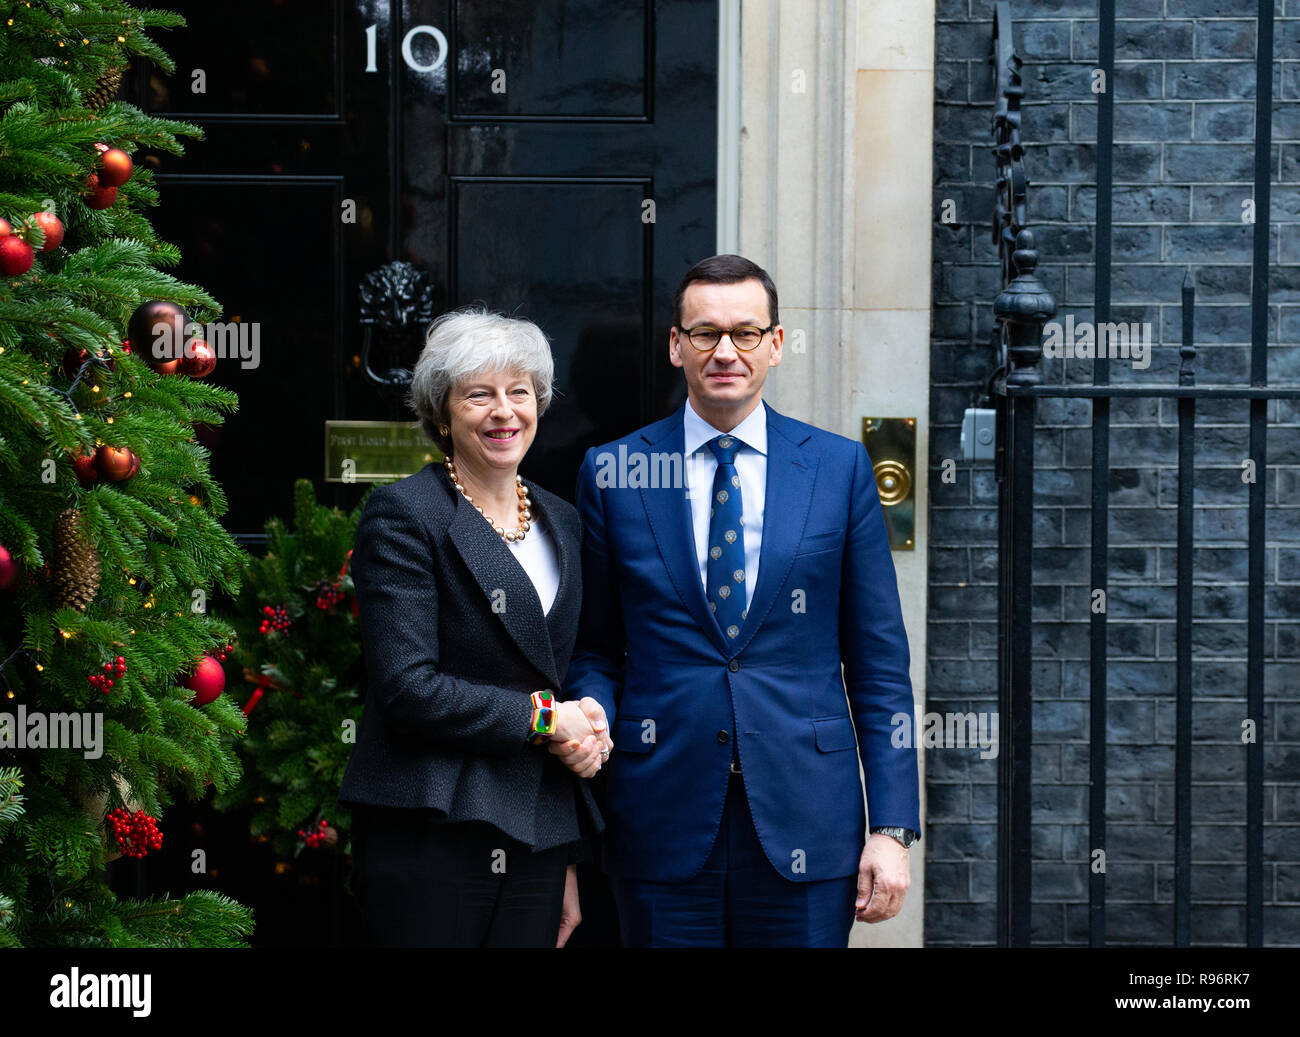 London, UK. 20th December, 2018. Prime Minister, Theresa May, meets her Polish Counterpart, Prime Minister Mateusz Morawiecki for talks. Credit: Tommy London/Alamy Live News Stock Photo